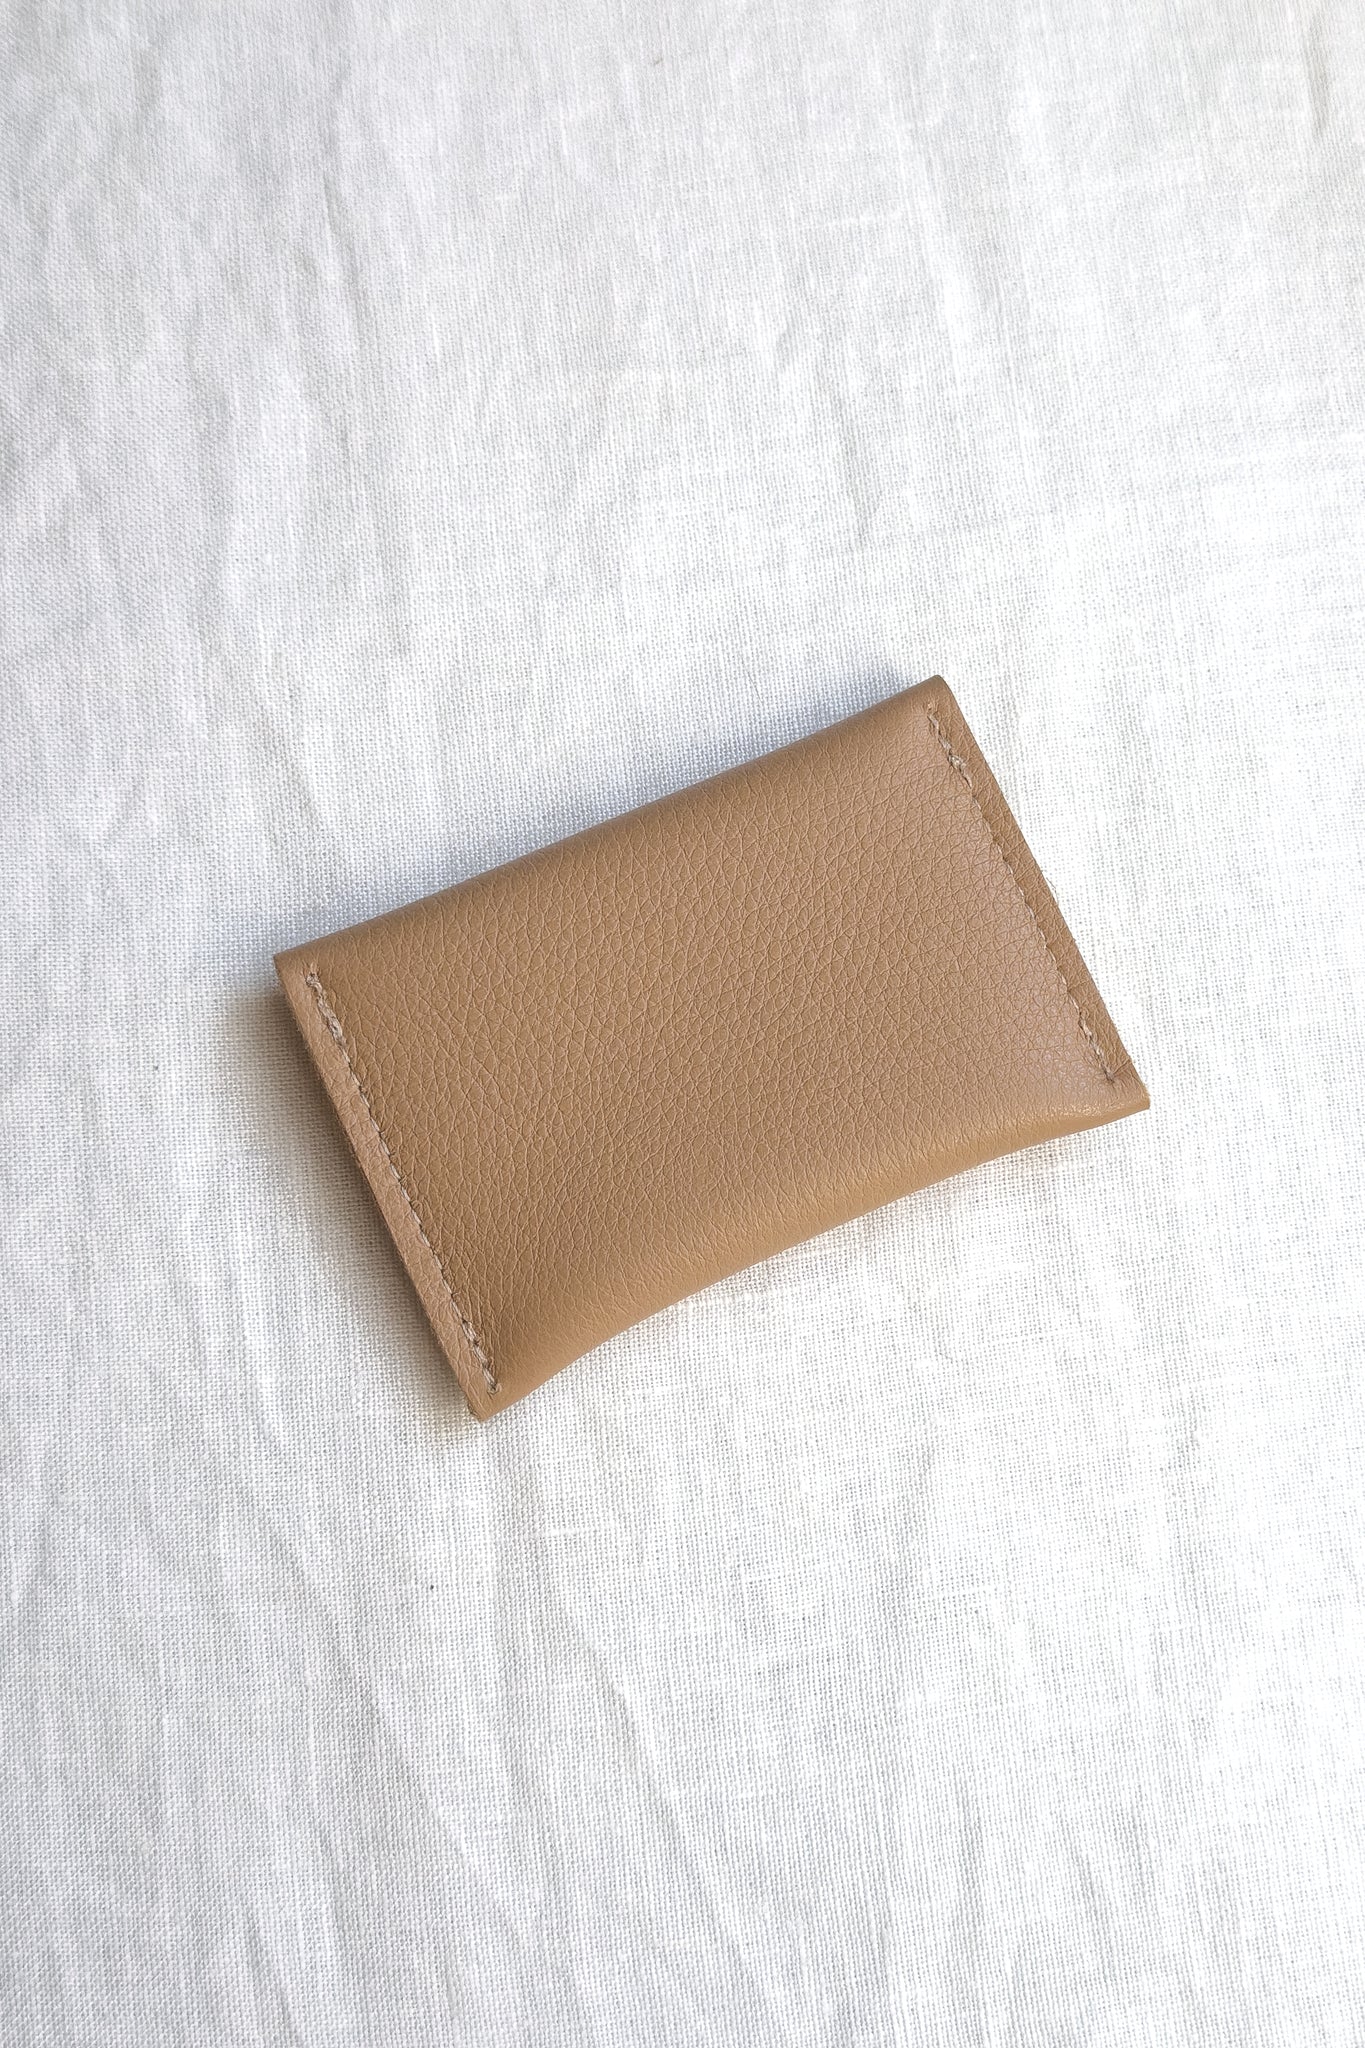 Card Holder / Tan Leather